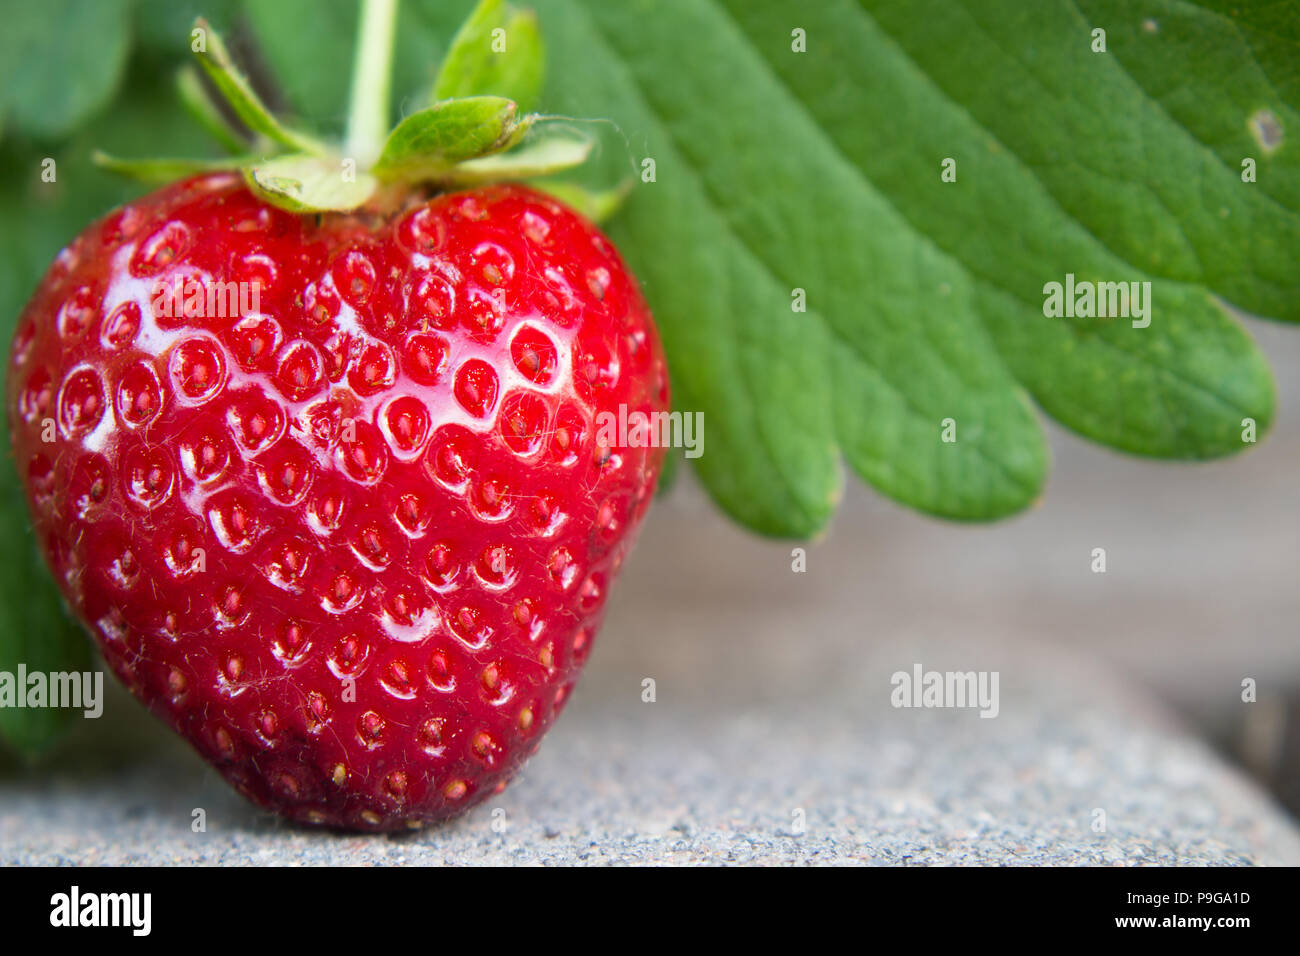 A delicious, heart shaped strawberry growing organically in the garden, hanging over a paver walkway Stock Photo